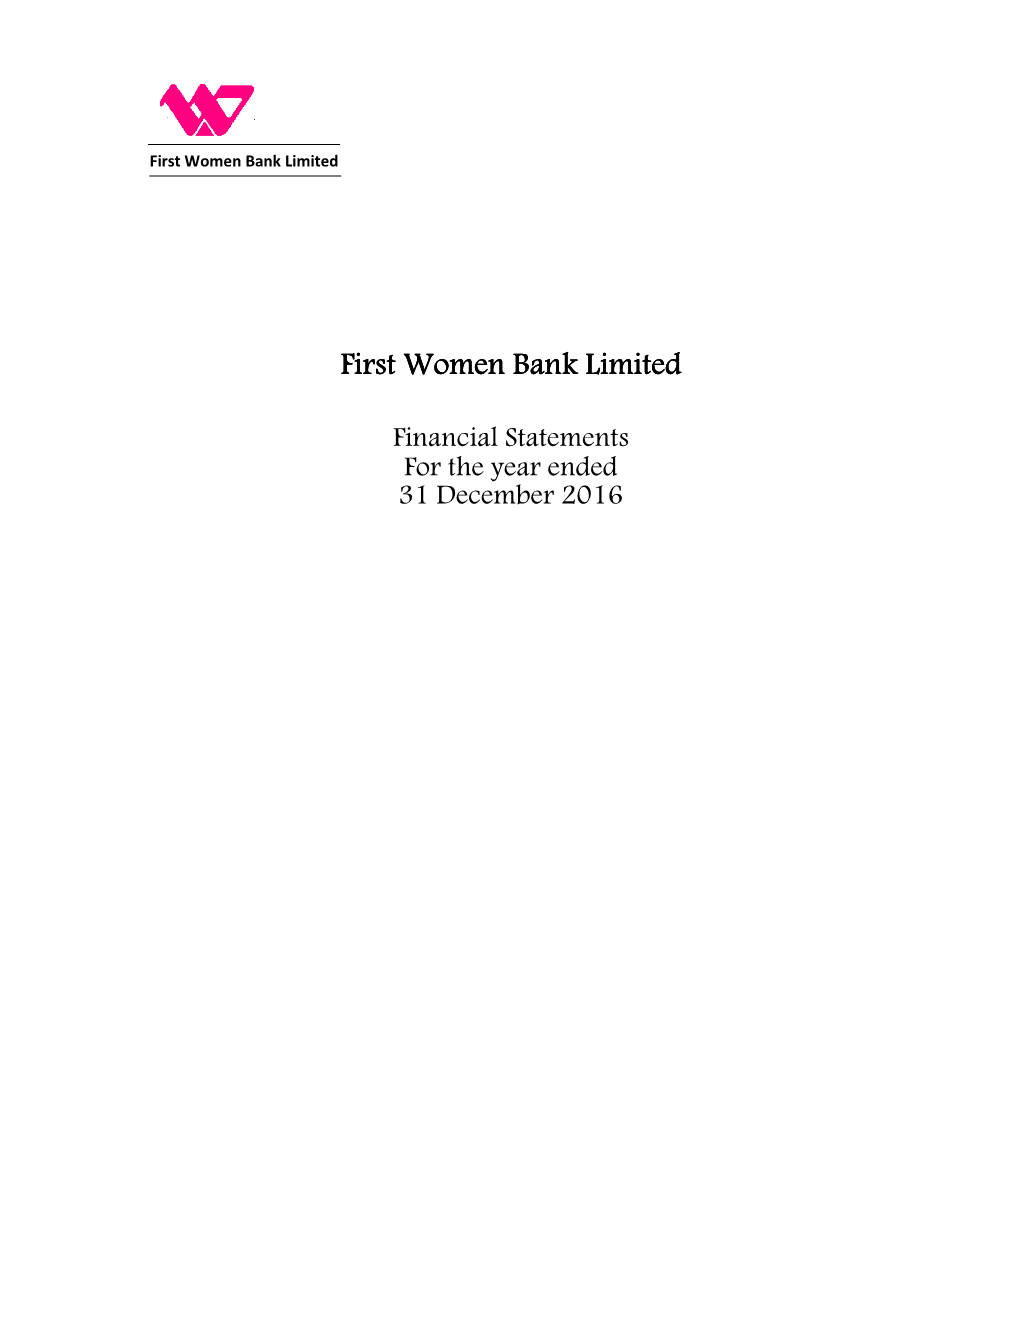 First Women First Women Bank Limited Bank Limited